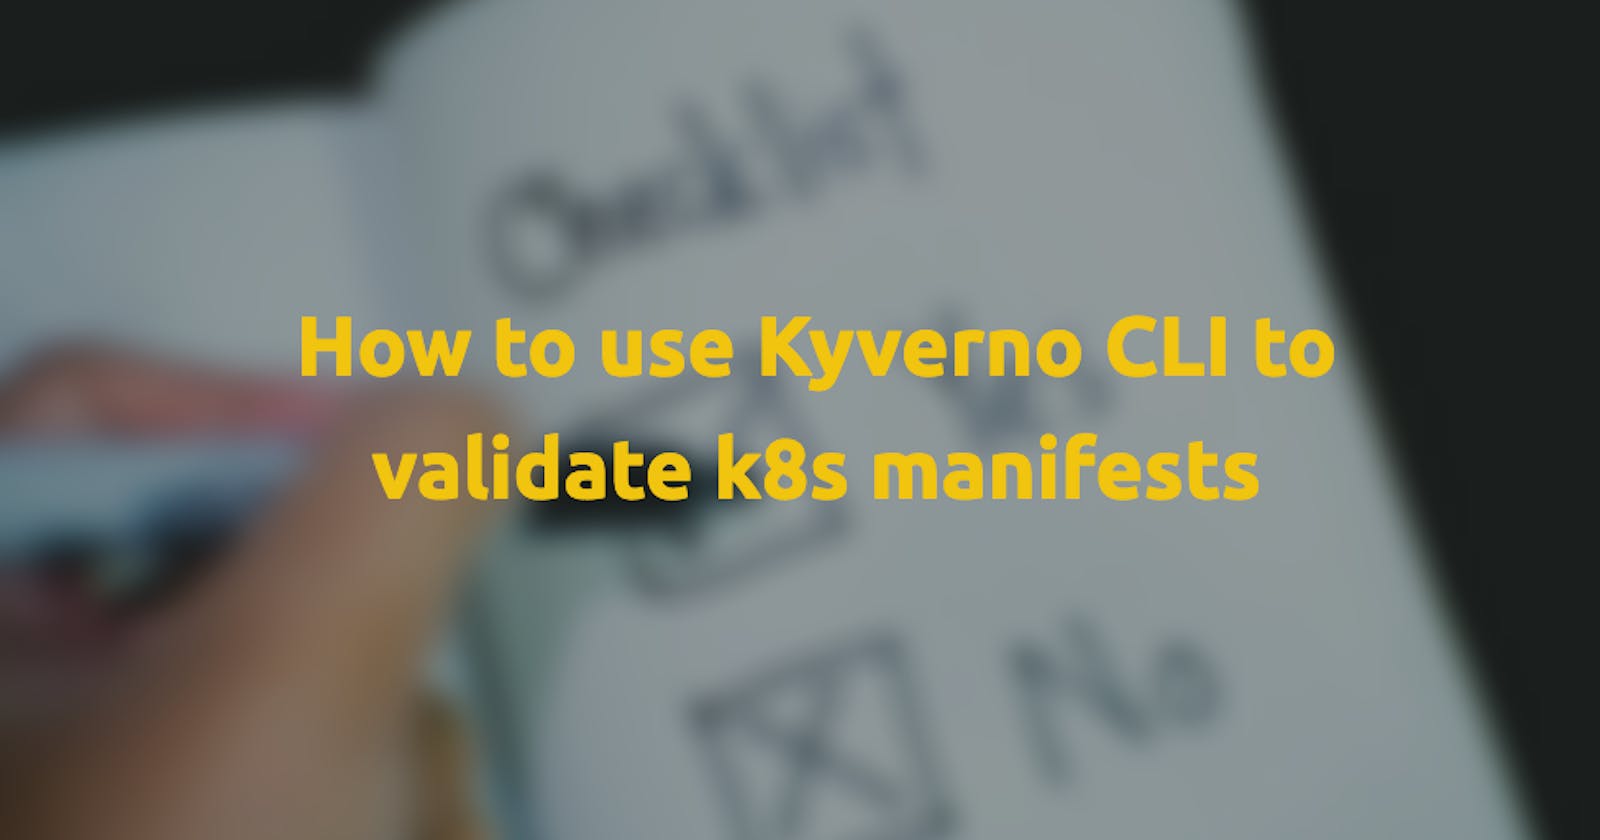 How to use Kyverno CLI to validate k8s manifests?